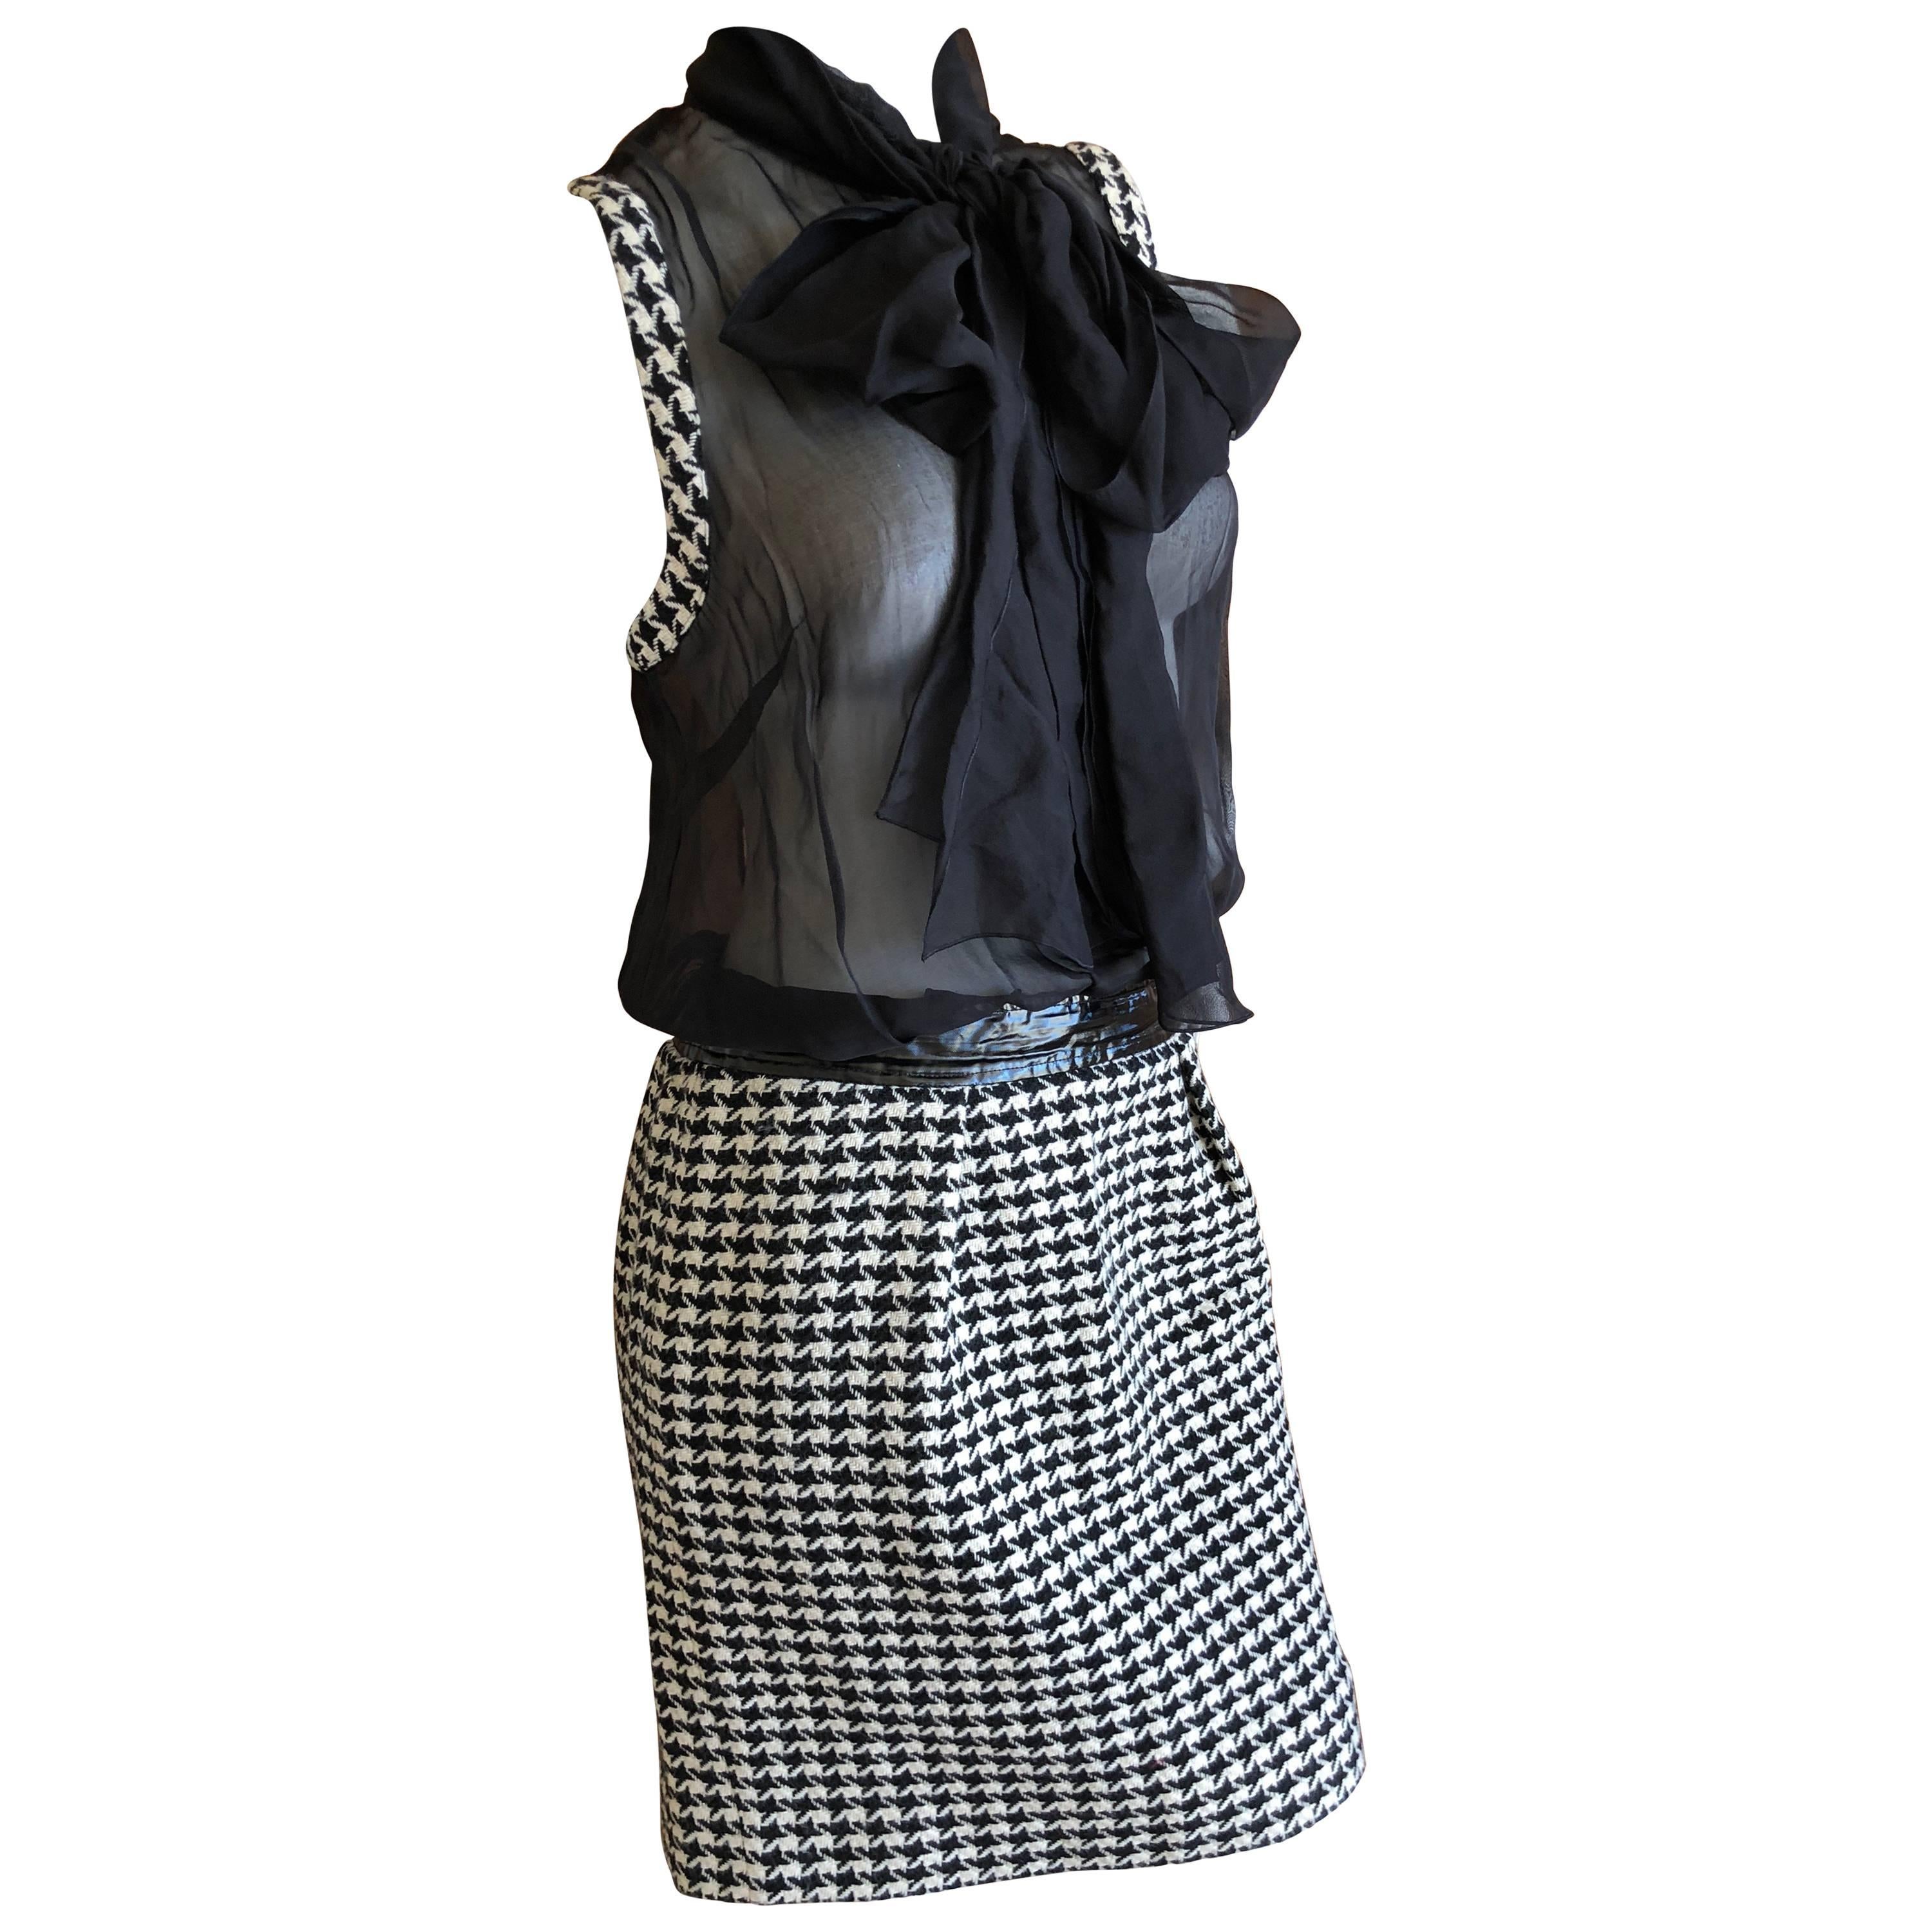 Dolce & Gabbana D&G Vintage Sheer Houndstooth Dress with Pussy Bow For Sale